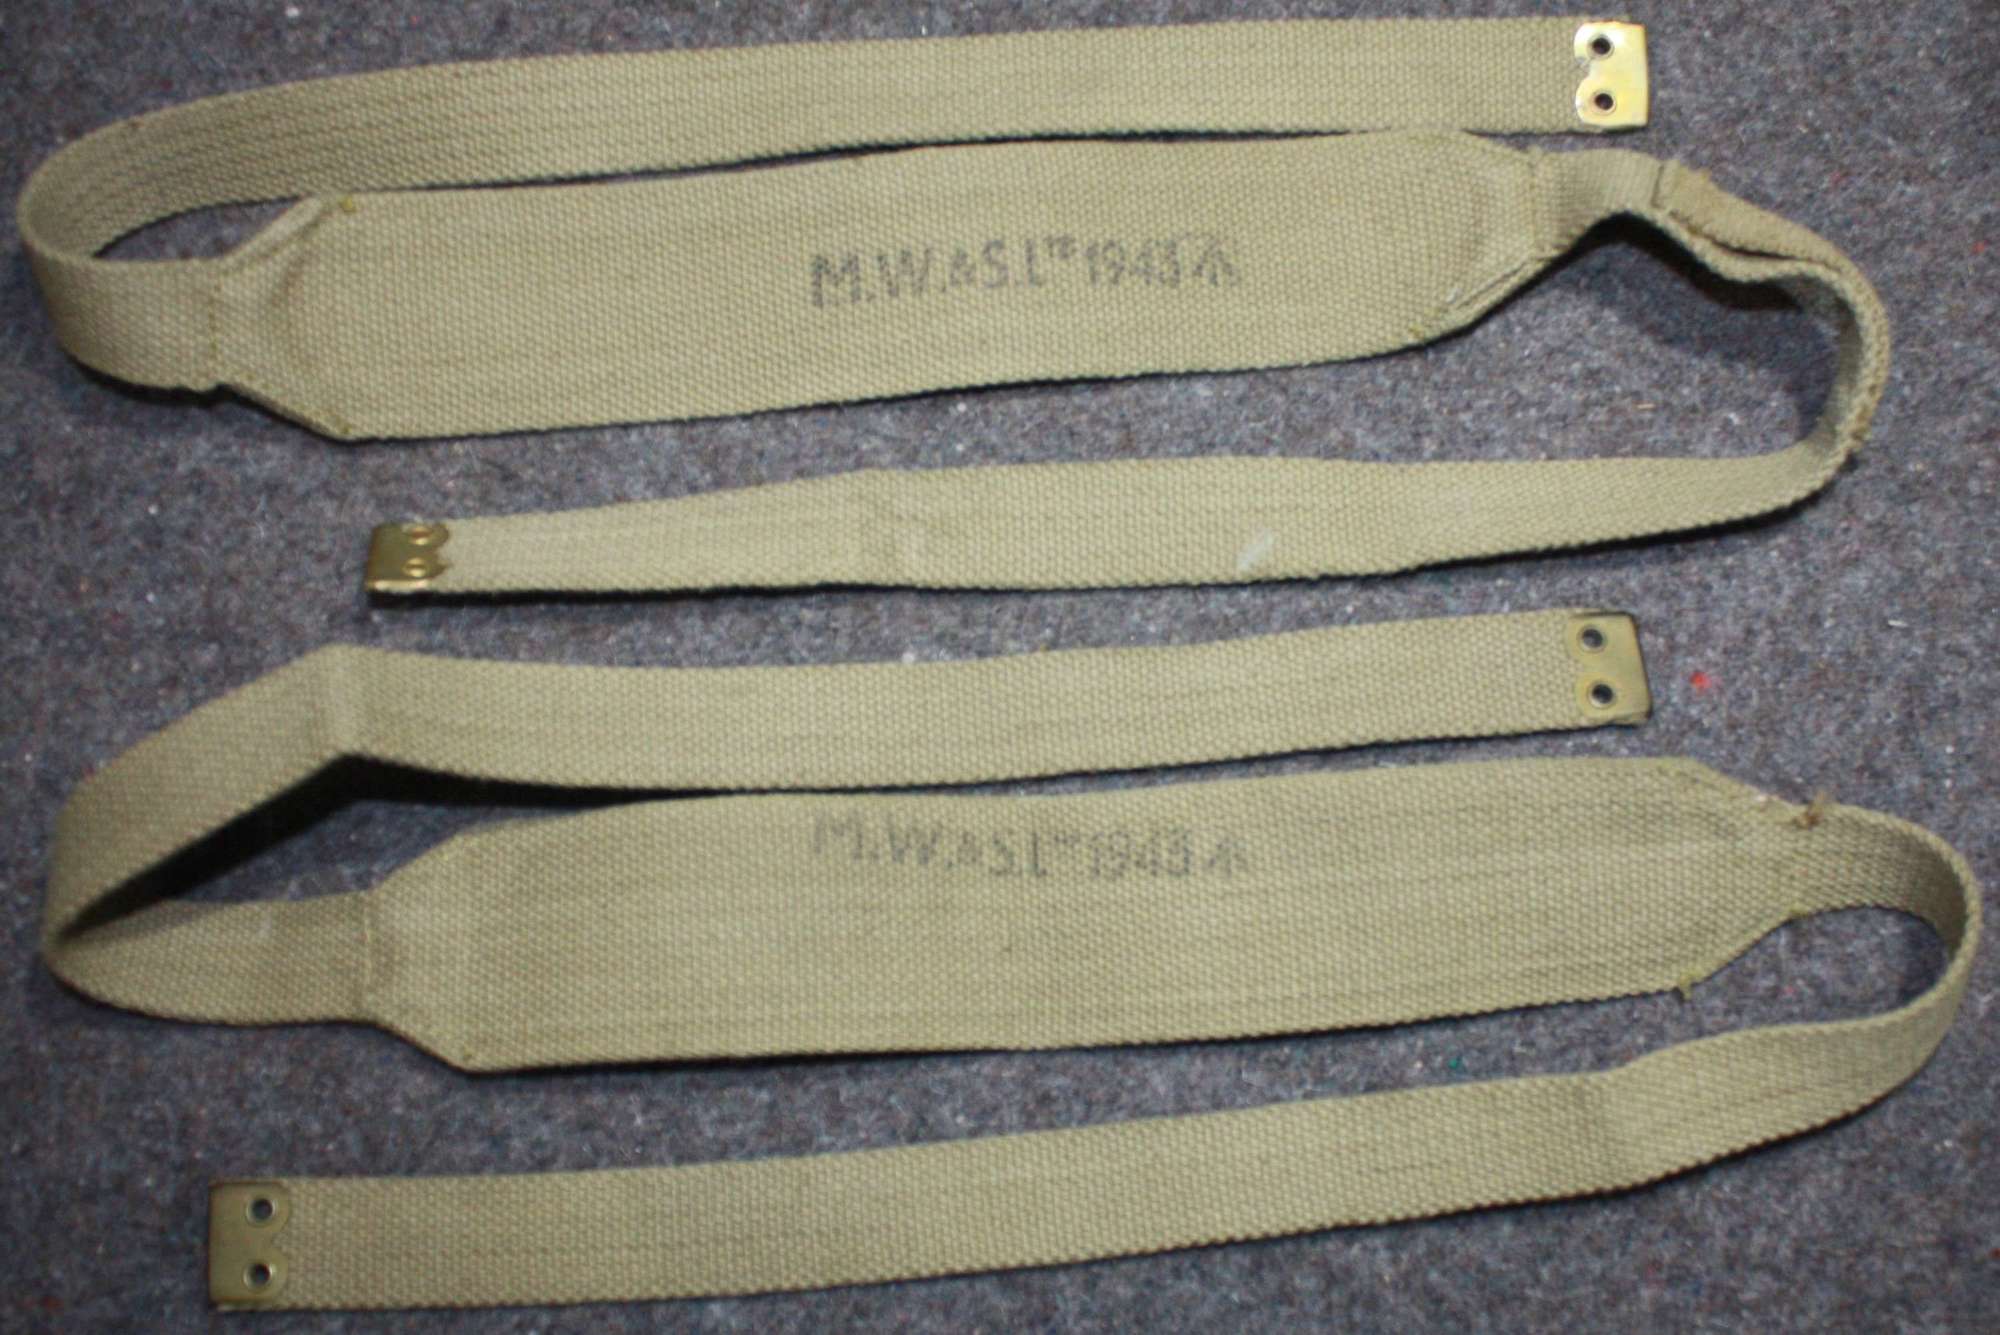 A GOOD MINT PAIR OF 37 PATTERN WEBBING SUSPENDERS MADE BY MWS 1943